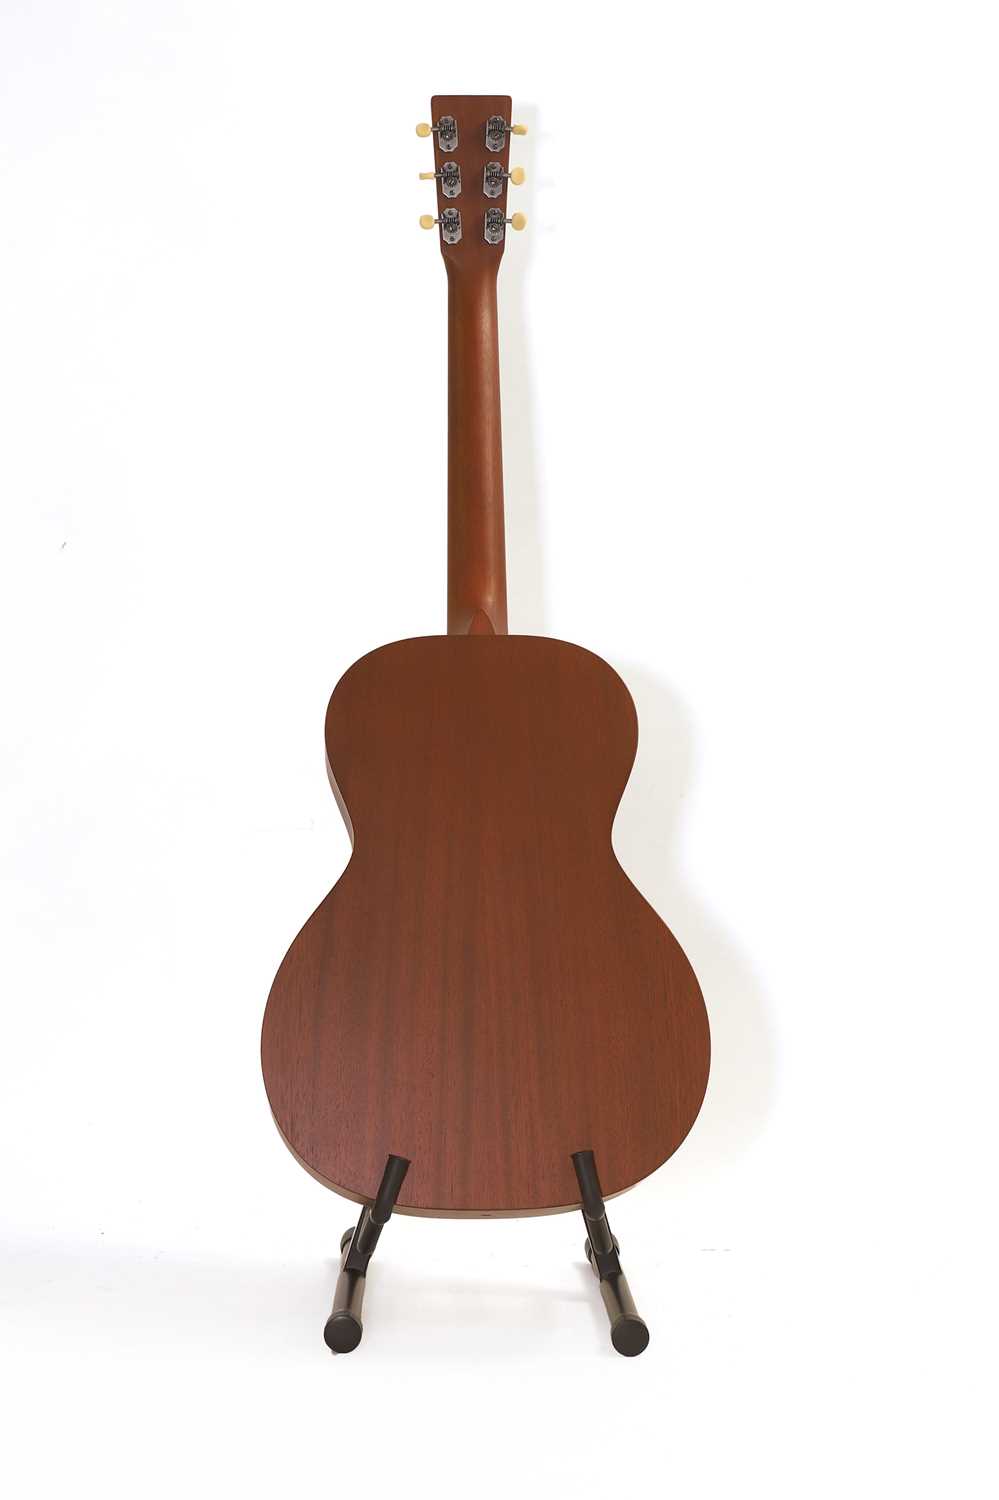 A 2009 Martin 00L-17 acoustic guitar, - Image 7 of 13